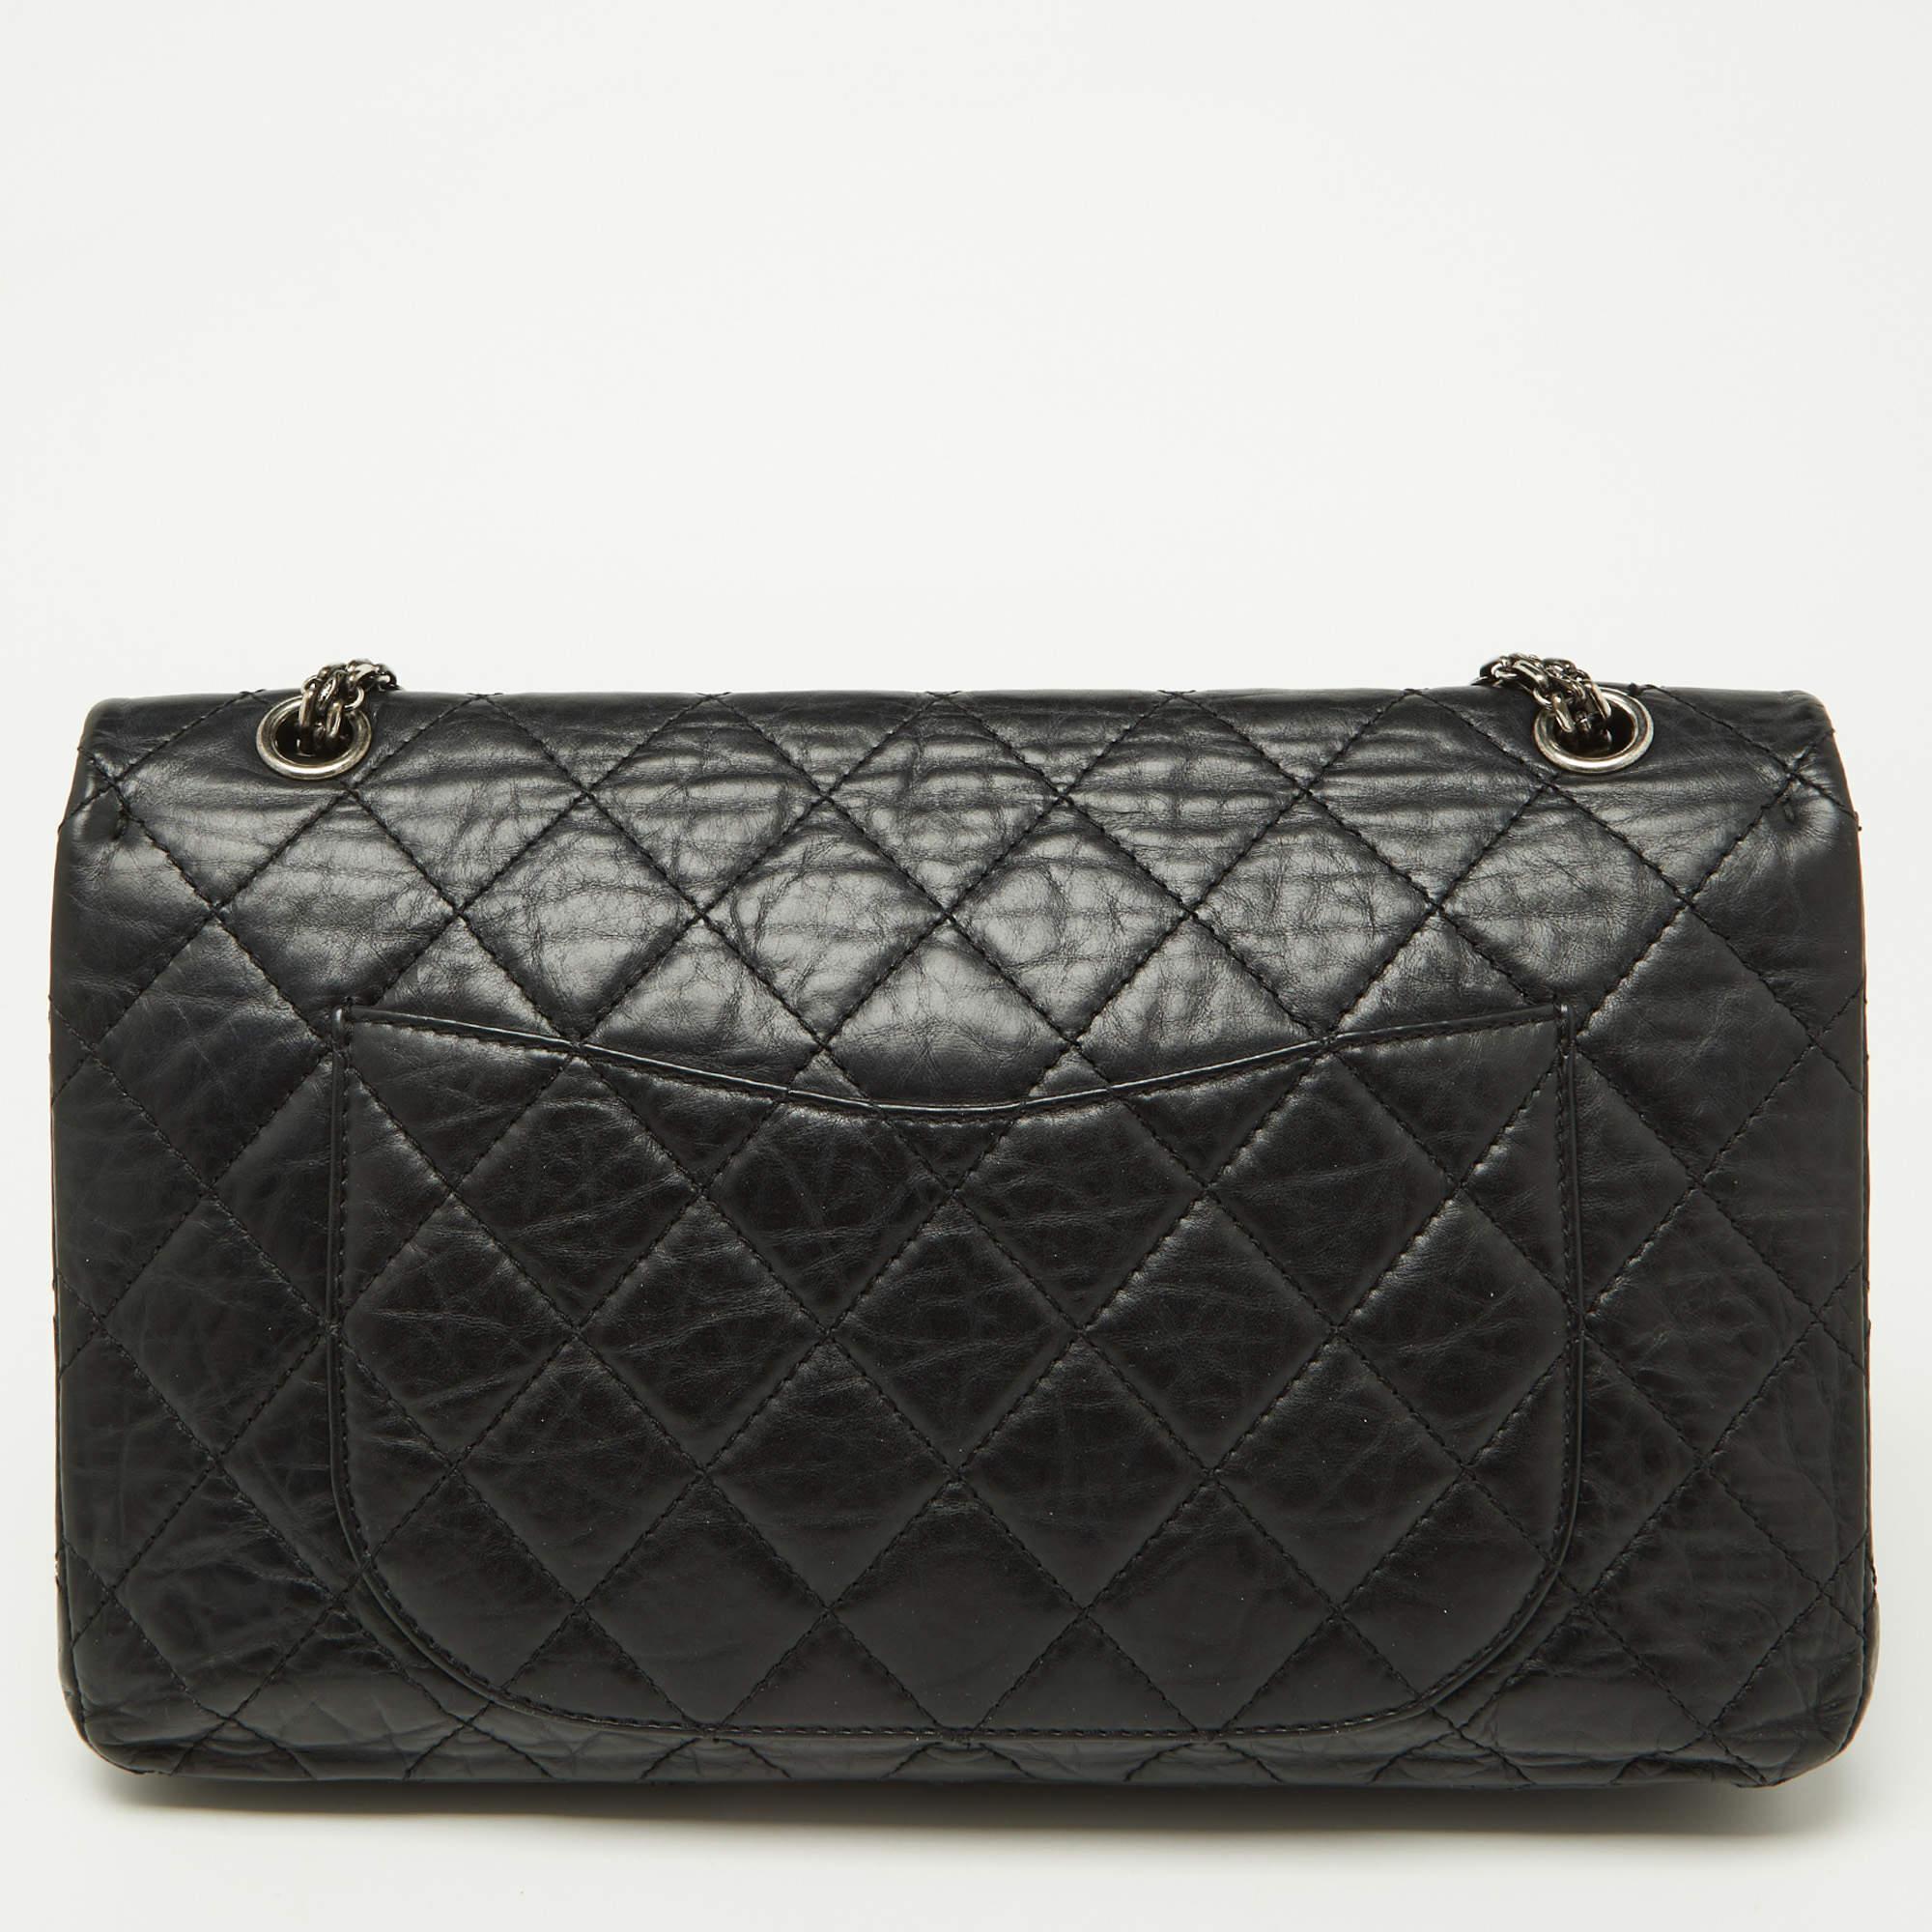 Chanel Black Quilted Aged Leather Reissue 2.55 Classic 227 Flap Bag For Sale 7